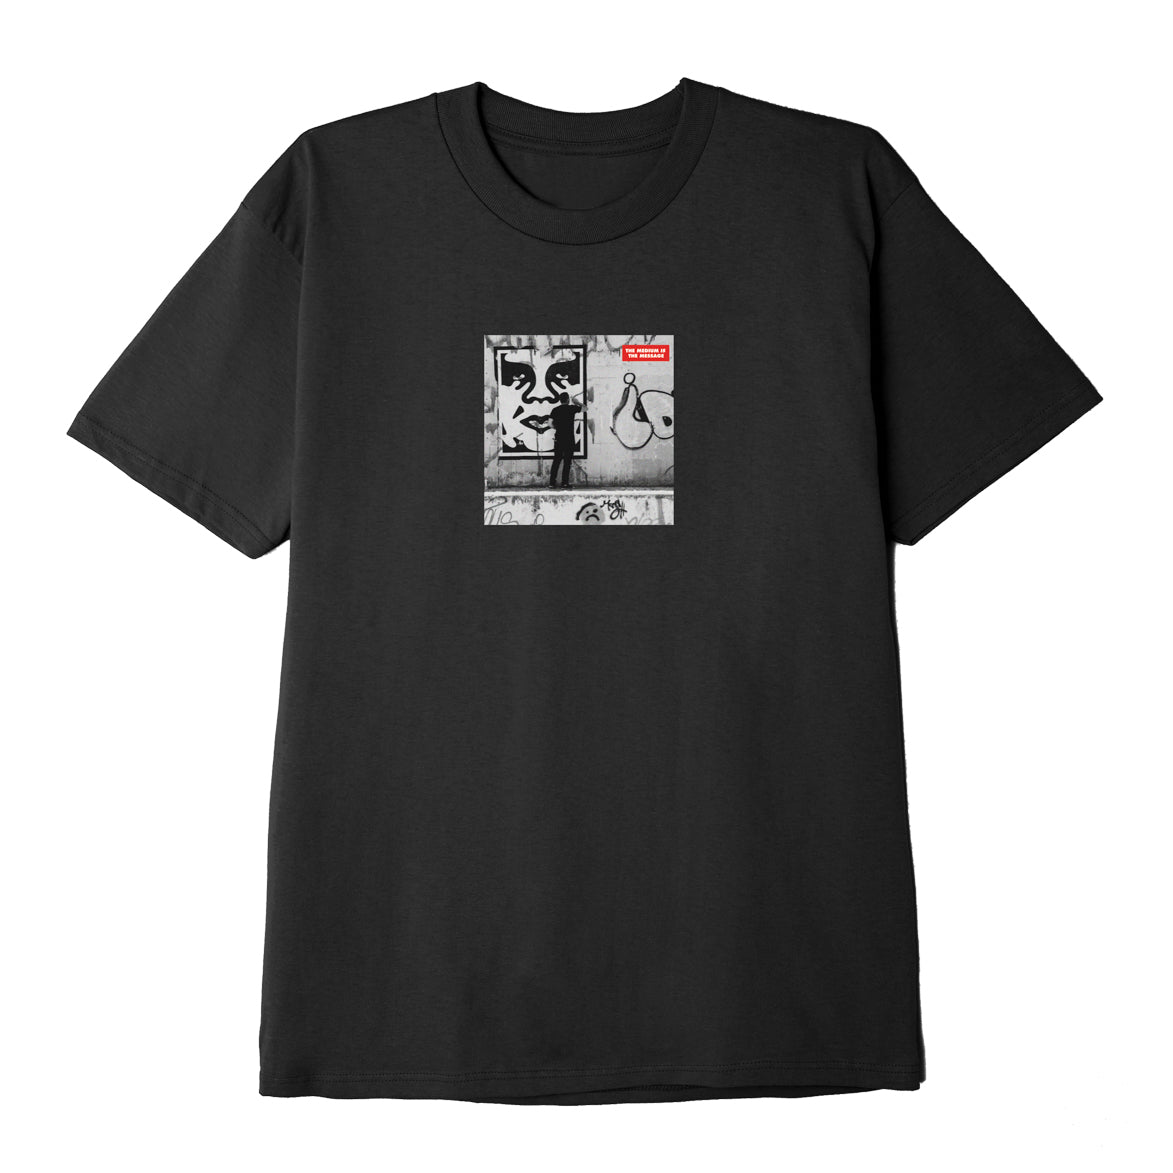 OBEY - The Medium is the Message Men's Classic Tee, Black